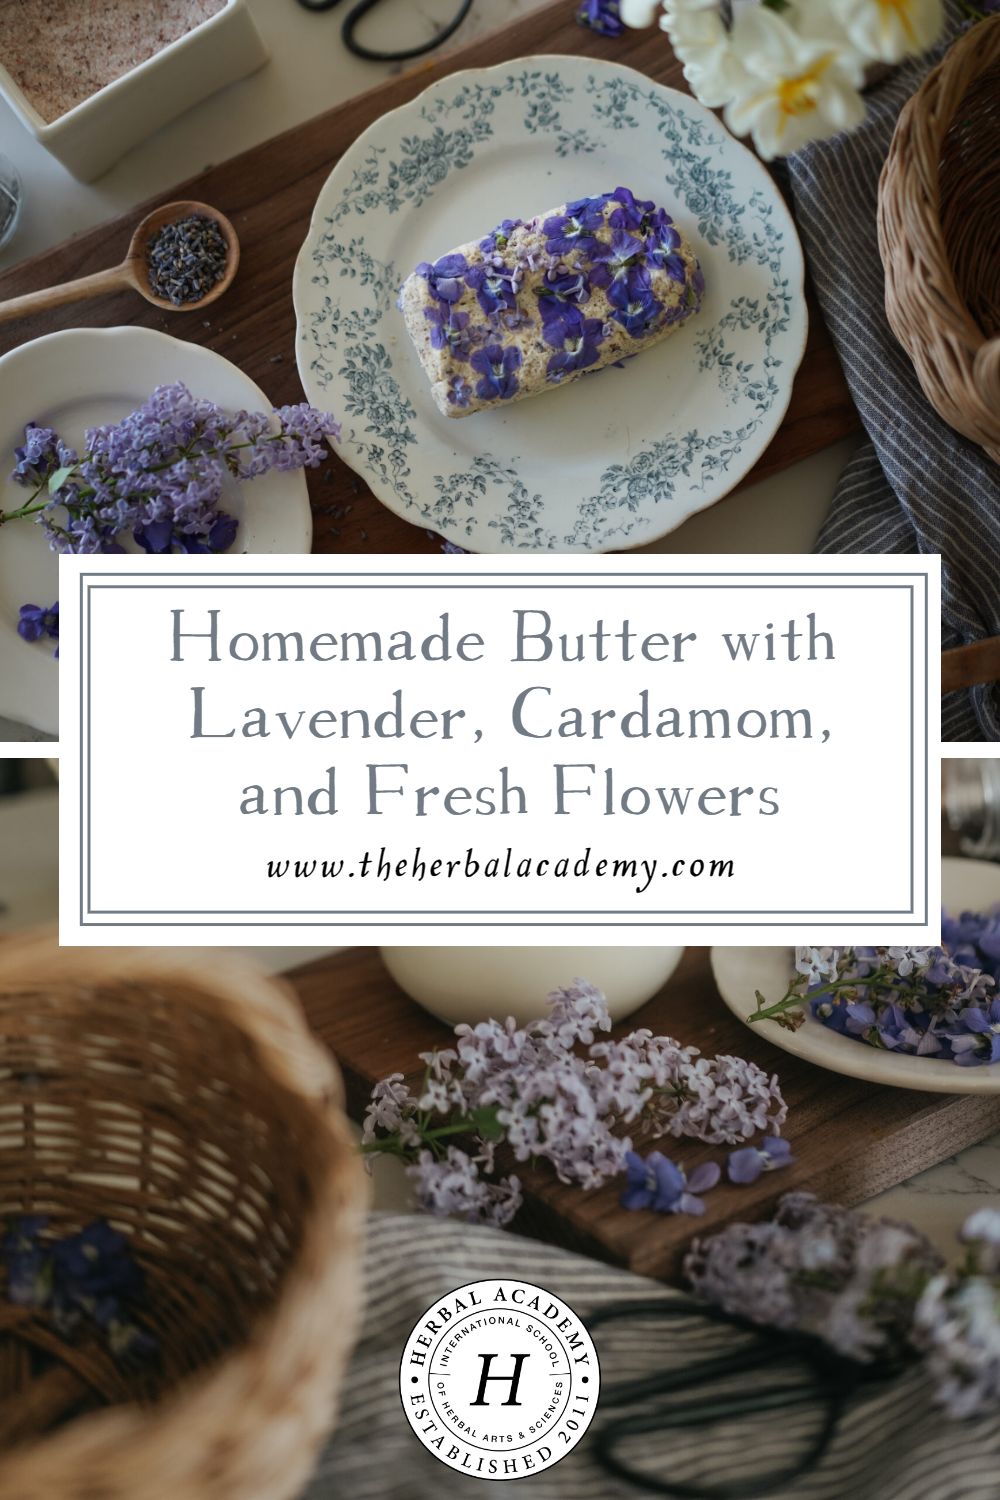 Homemade Butter with Lavender, Cardamom, and Fresh Flowers | Herbal Academy | Here’s how to make homemade butter from heavy whipping cream, complete with the flavorful accents of lavender and cardamom.